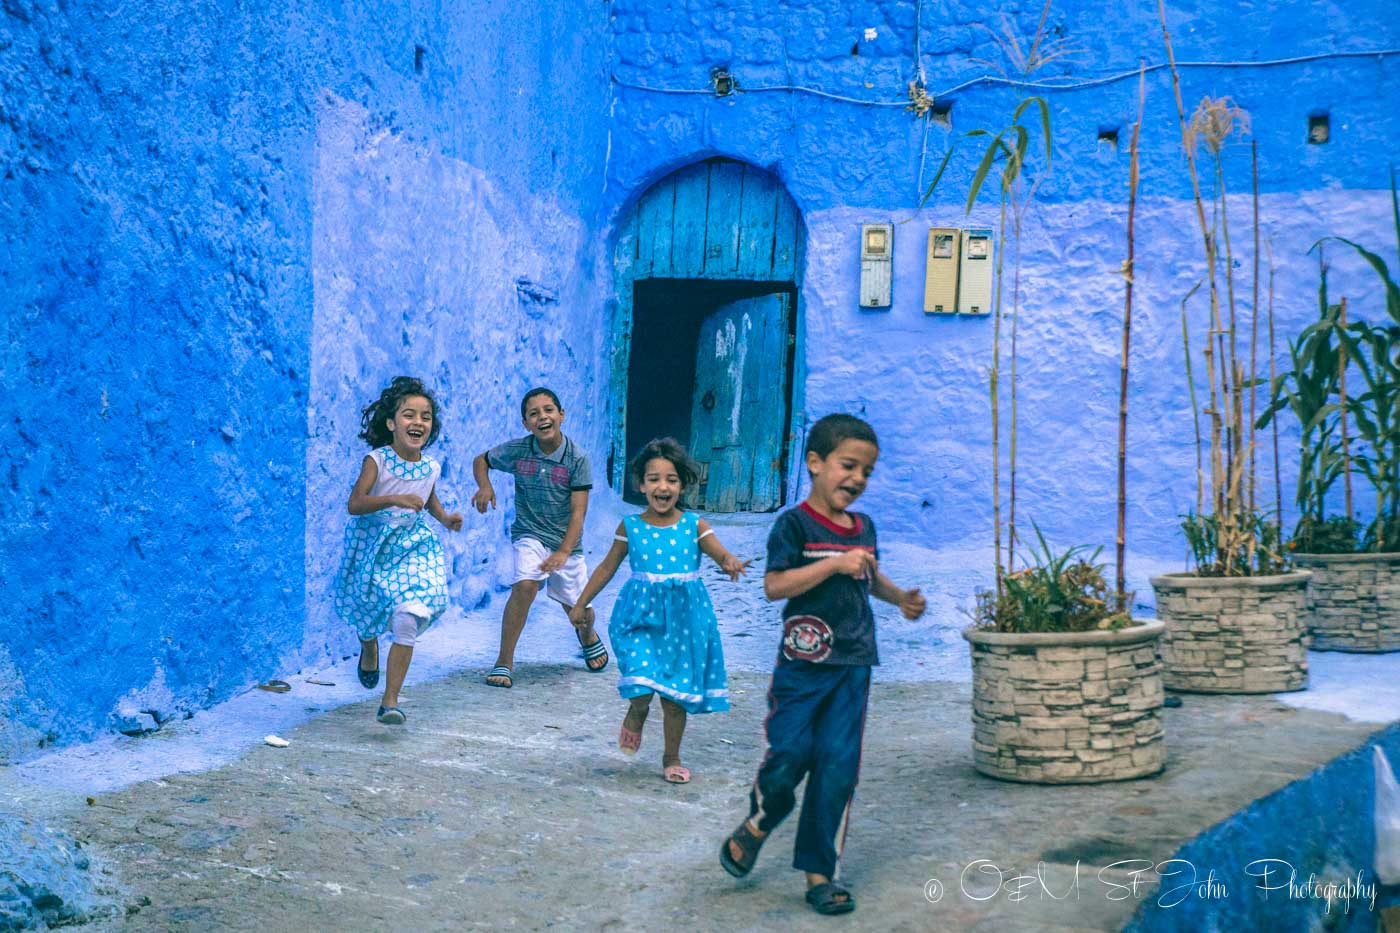 Kids running in Chefchaouen, Morocco